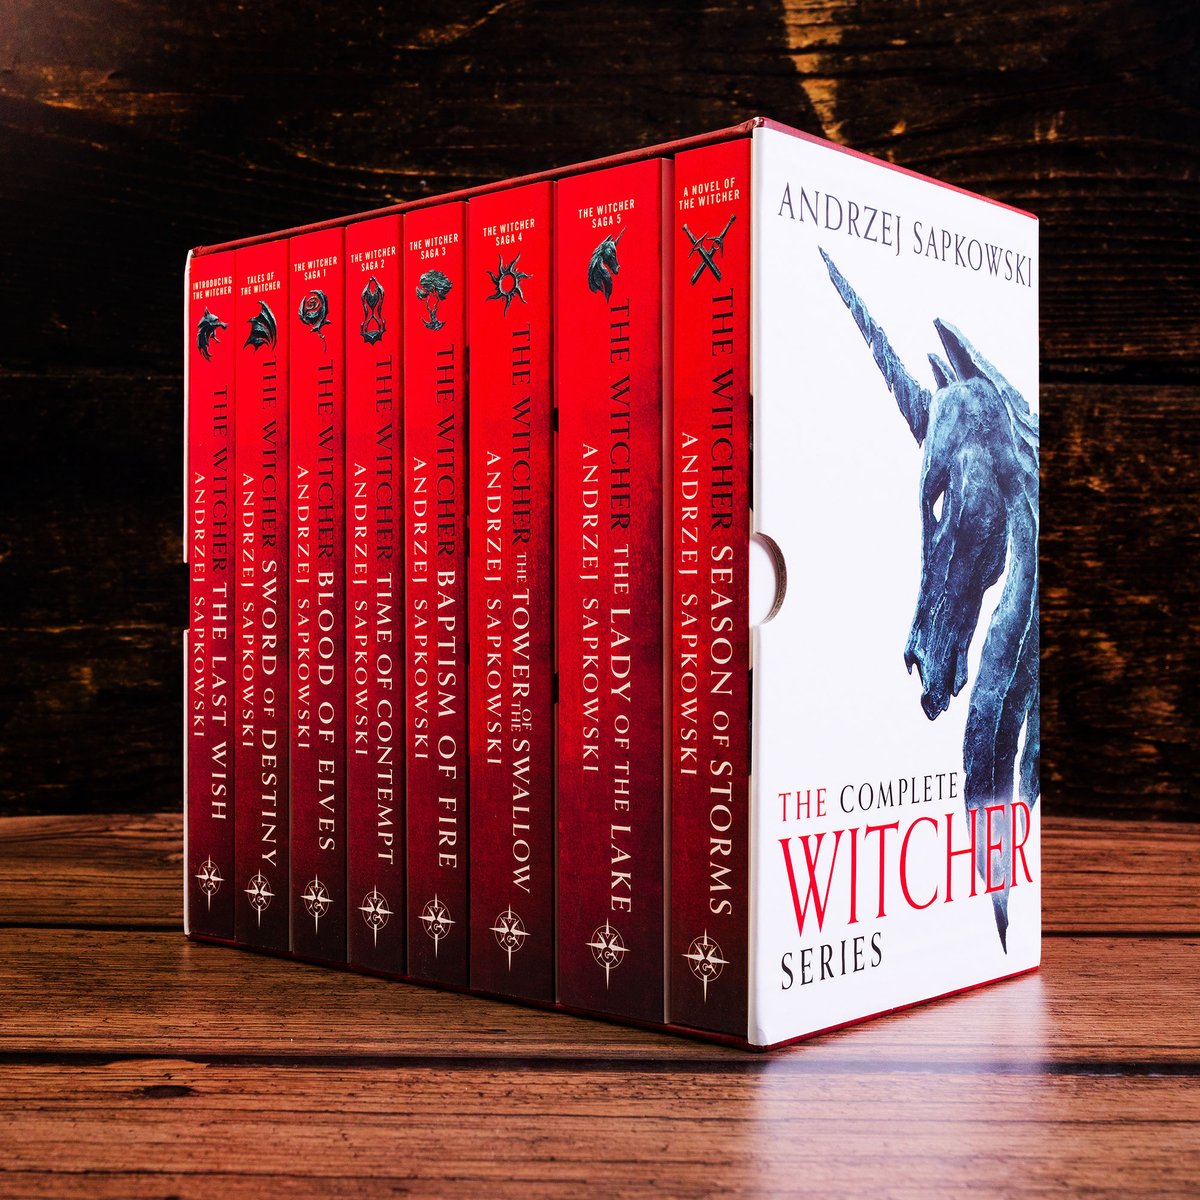 Discover the complete boxed set of all 8 books in #AndrzejSapkowski's legendary #Witcher series. Featuring the 2023 white cover editions of the books for the first time! Out today: brnw.ch/21wJ9Rb